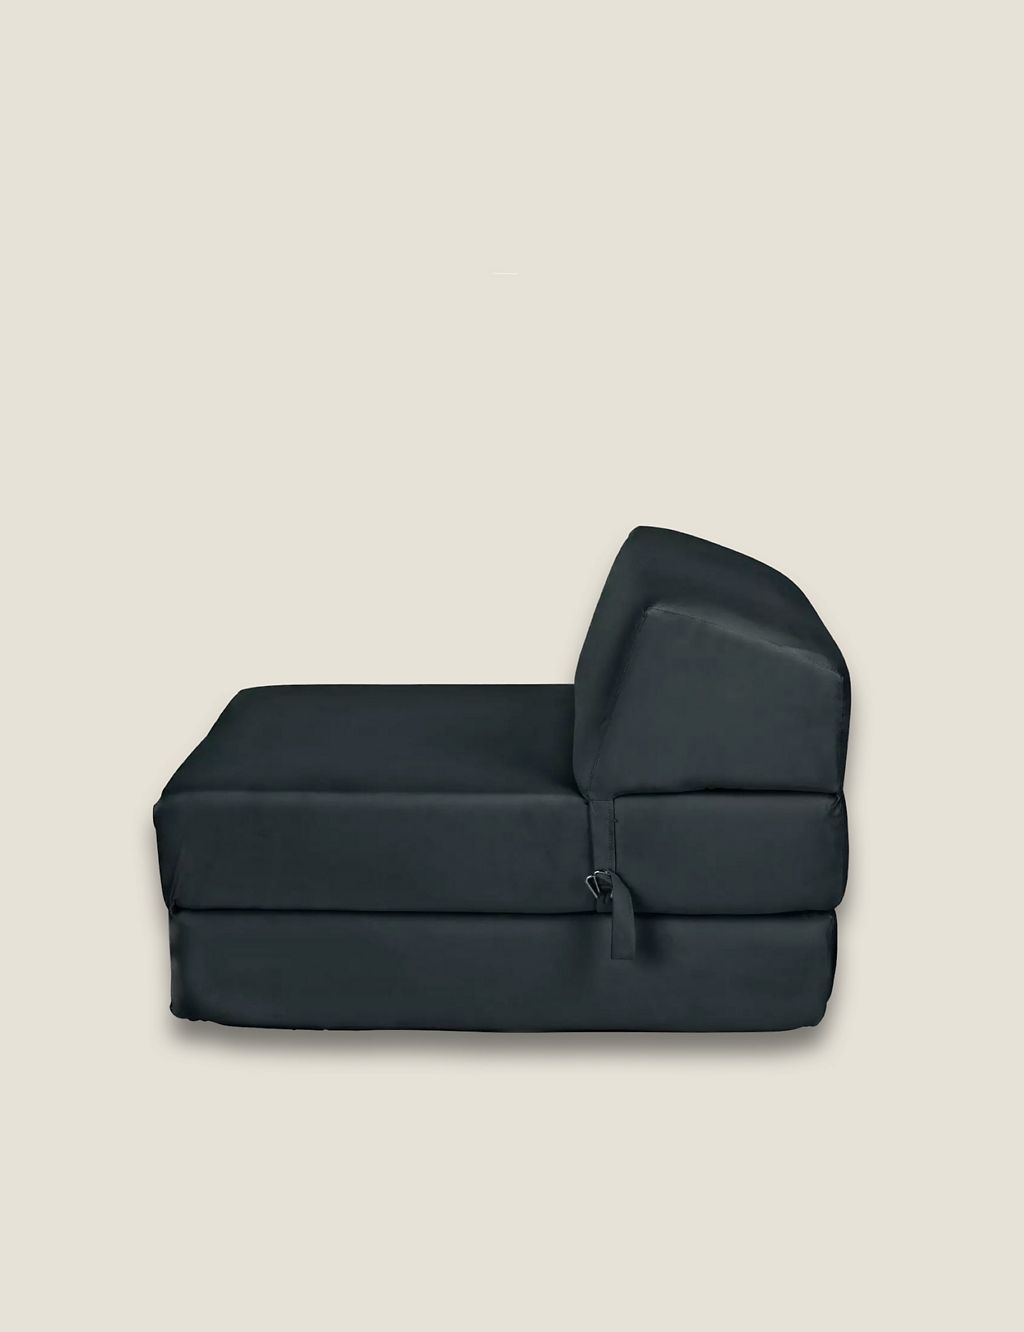 Black Single Chairbed 1 of 3